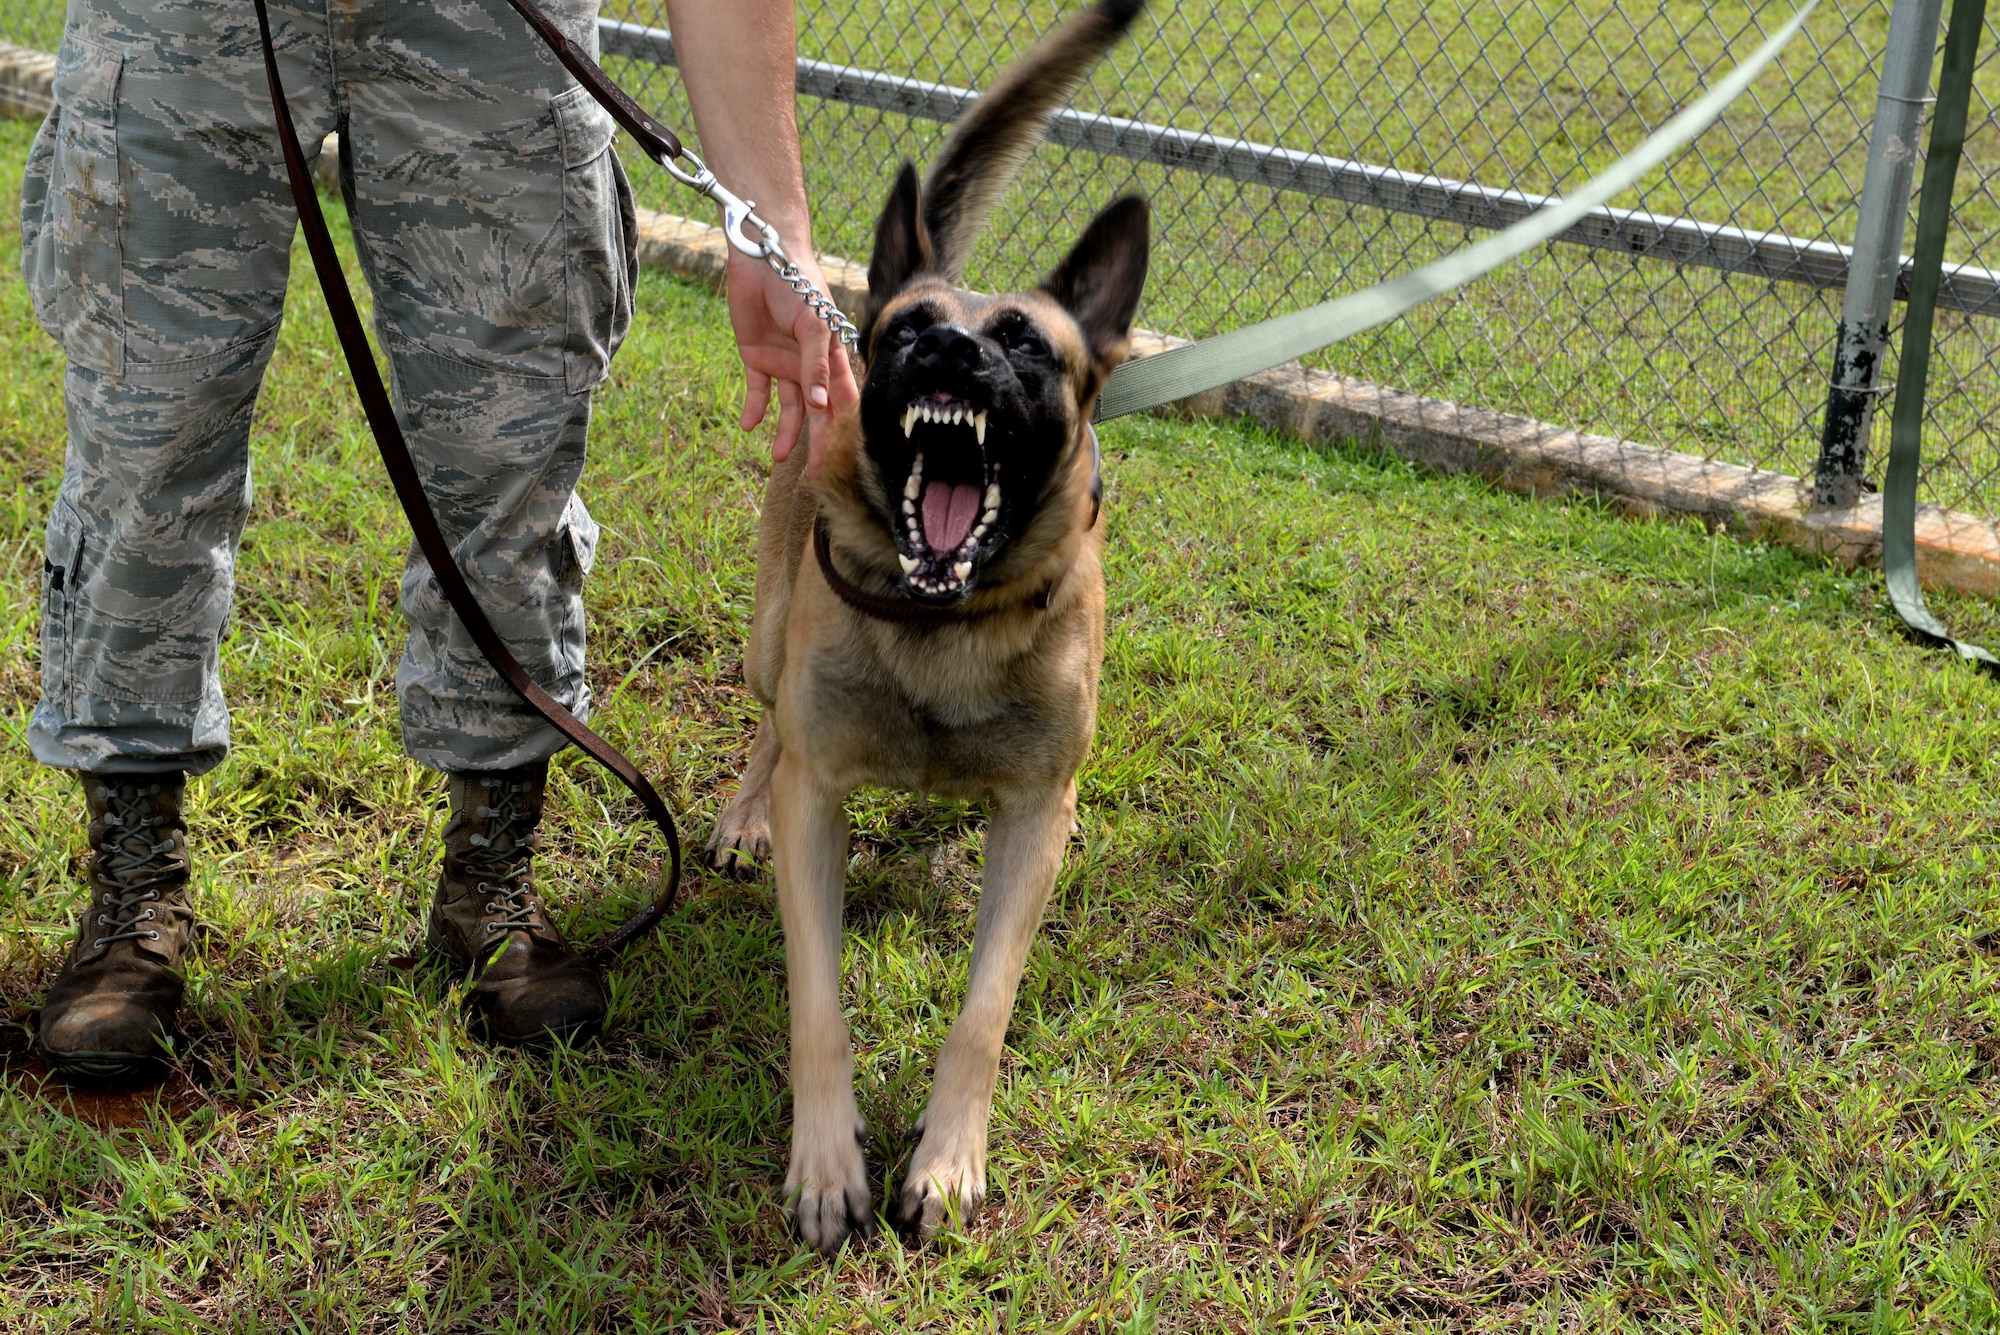 Military working dog Ramos shows his teeth during patrol training Oct. 28, 2015, at Andersen Air Force Base, Guam. Ramos is a patrol and detection dog, meaning he trains in both daily to keep his skills up to date. (U.S. Air Force photo/Airman 1st Class Alexa Ann Henderson)